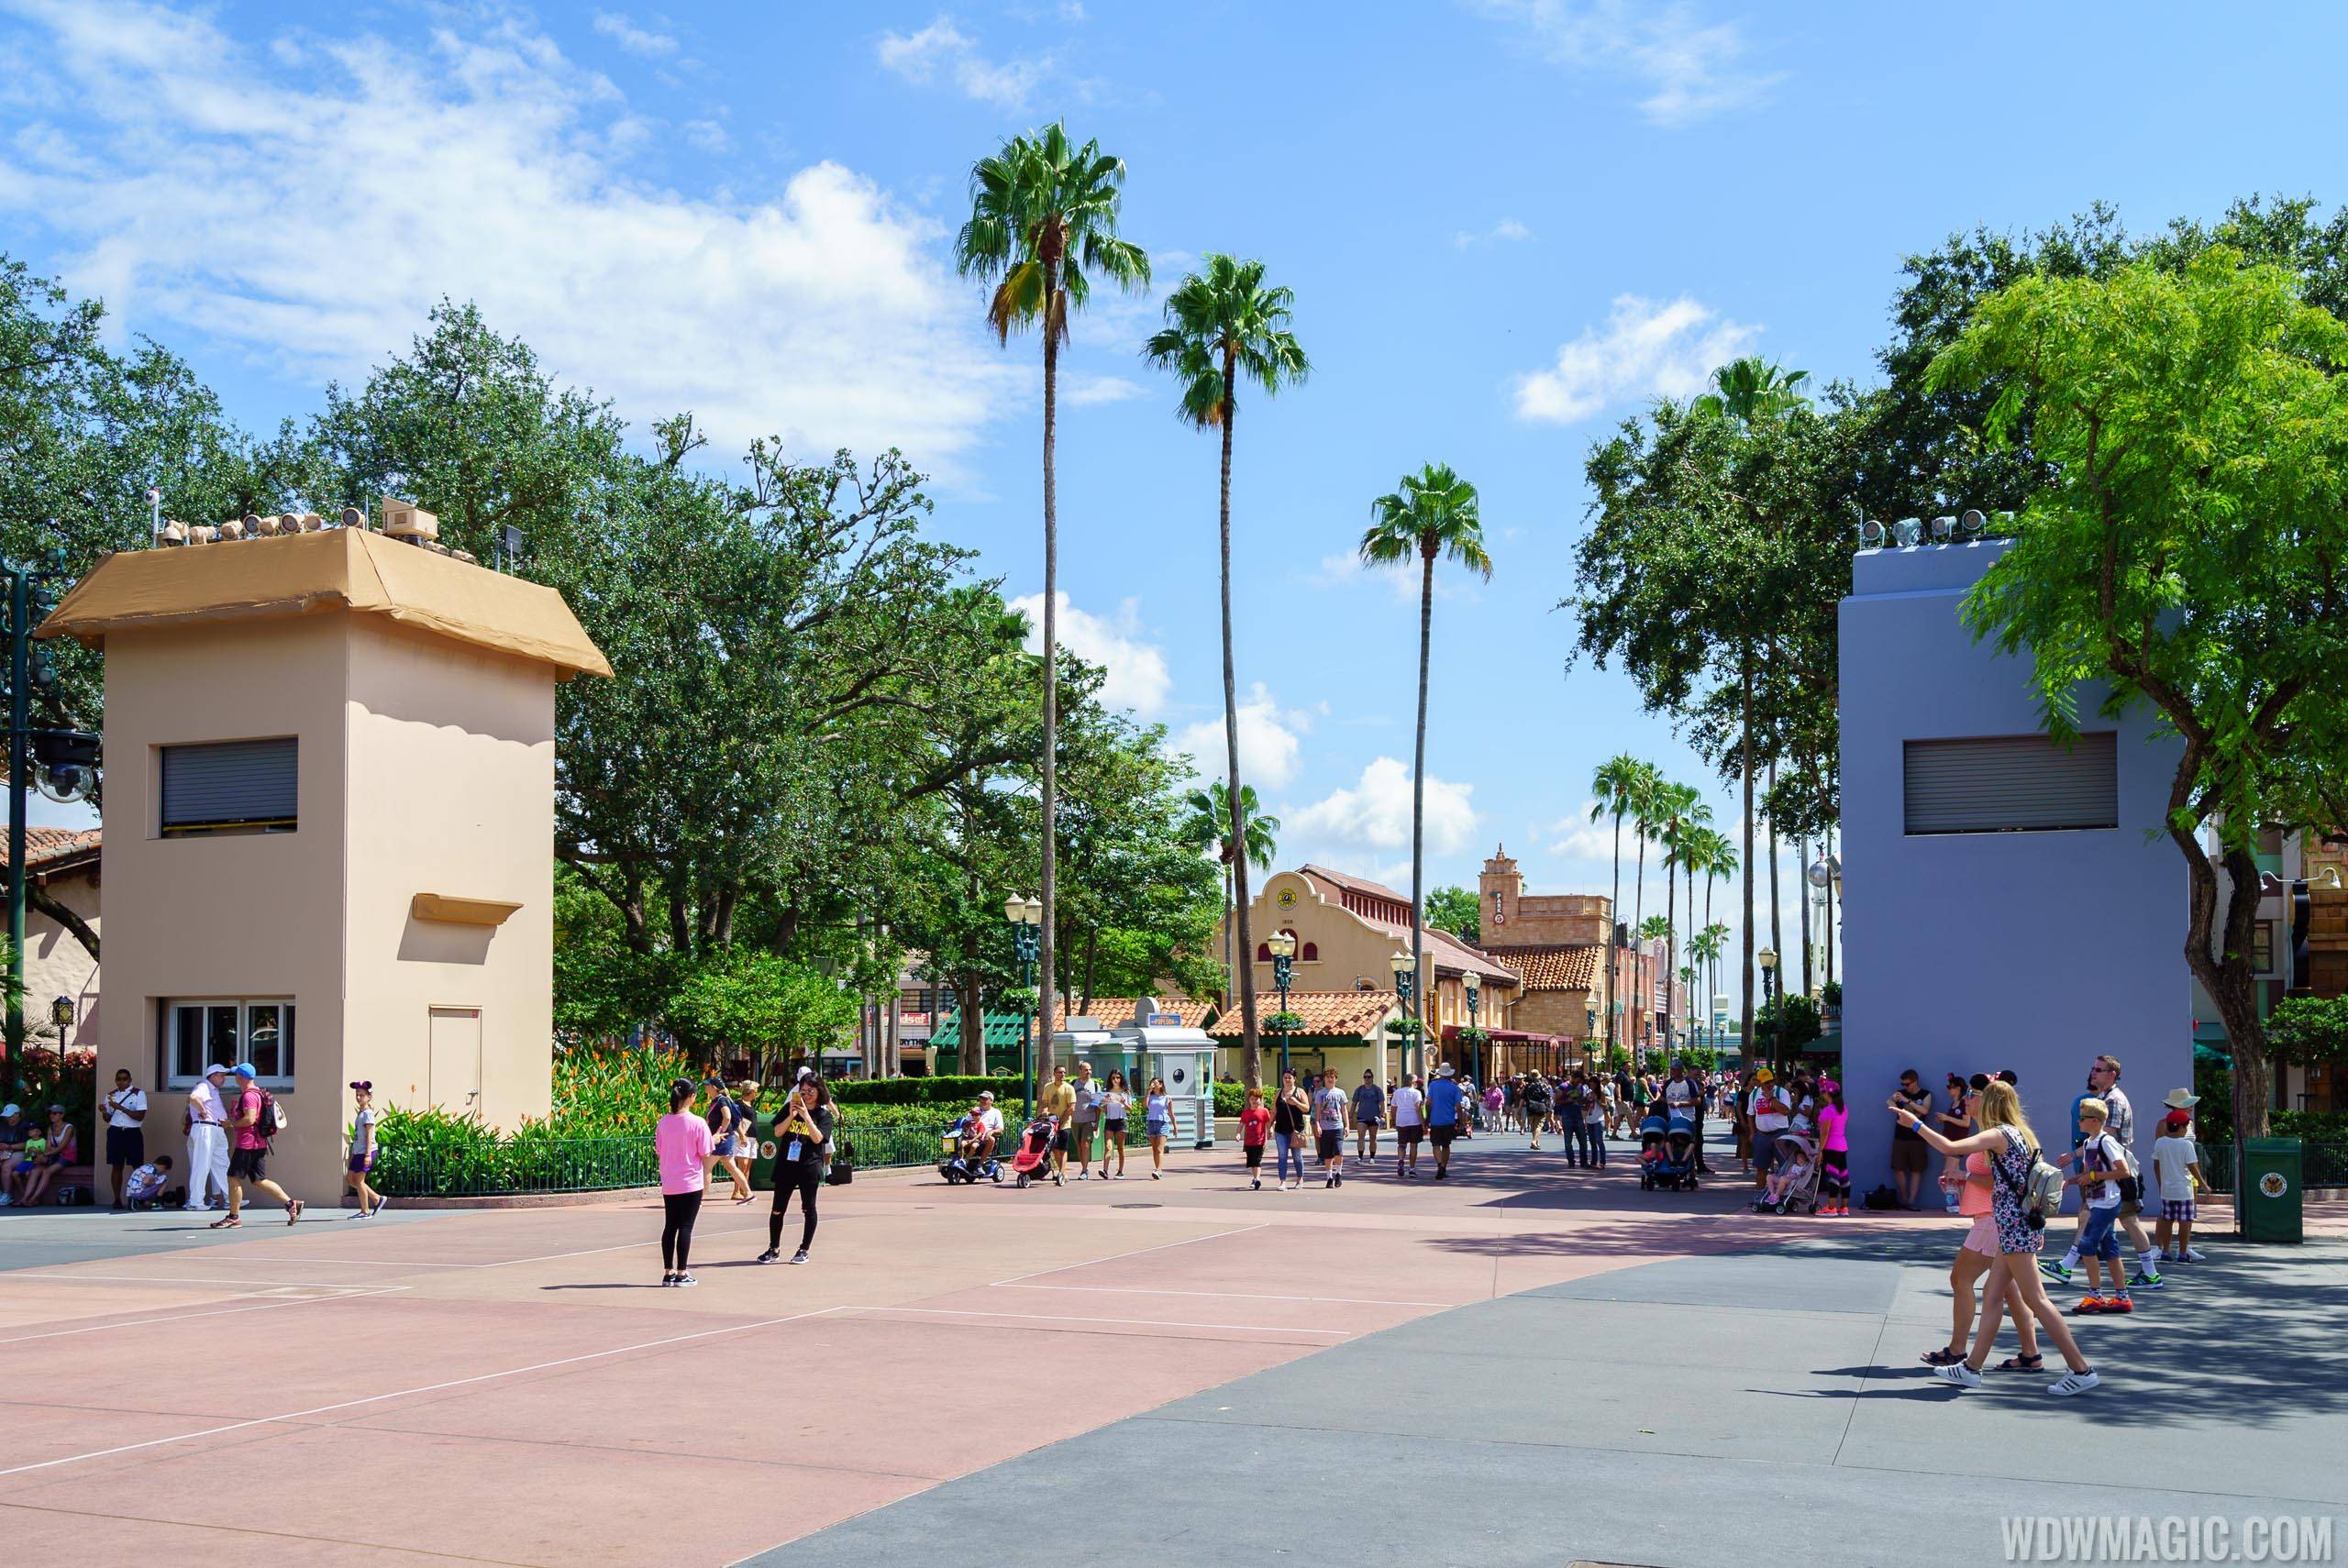 PHOTOS - Details being added to the projection towers at Disney's Hollywood Studios